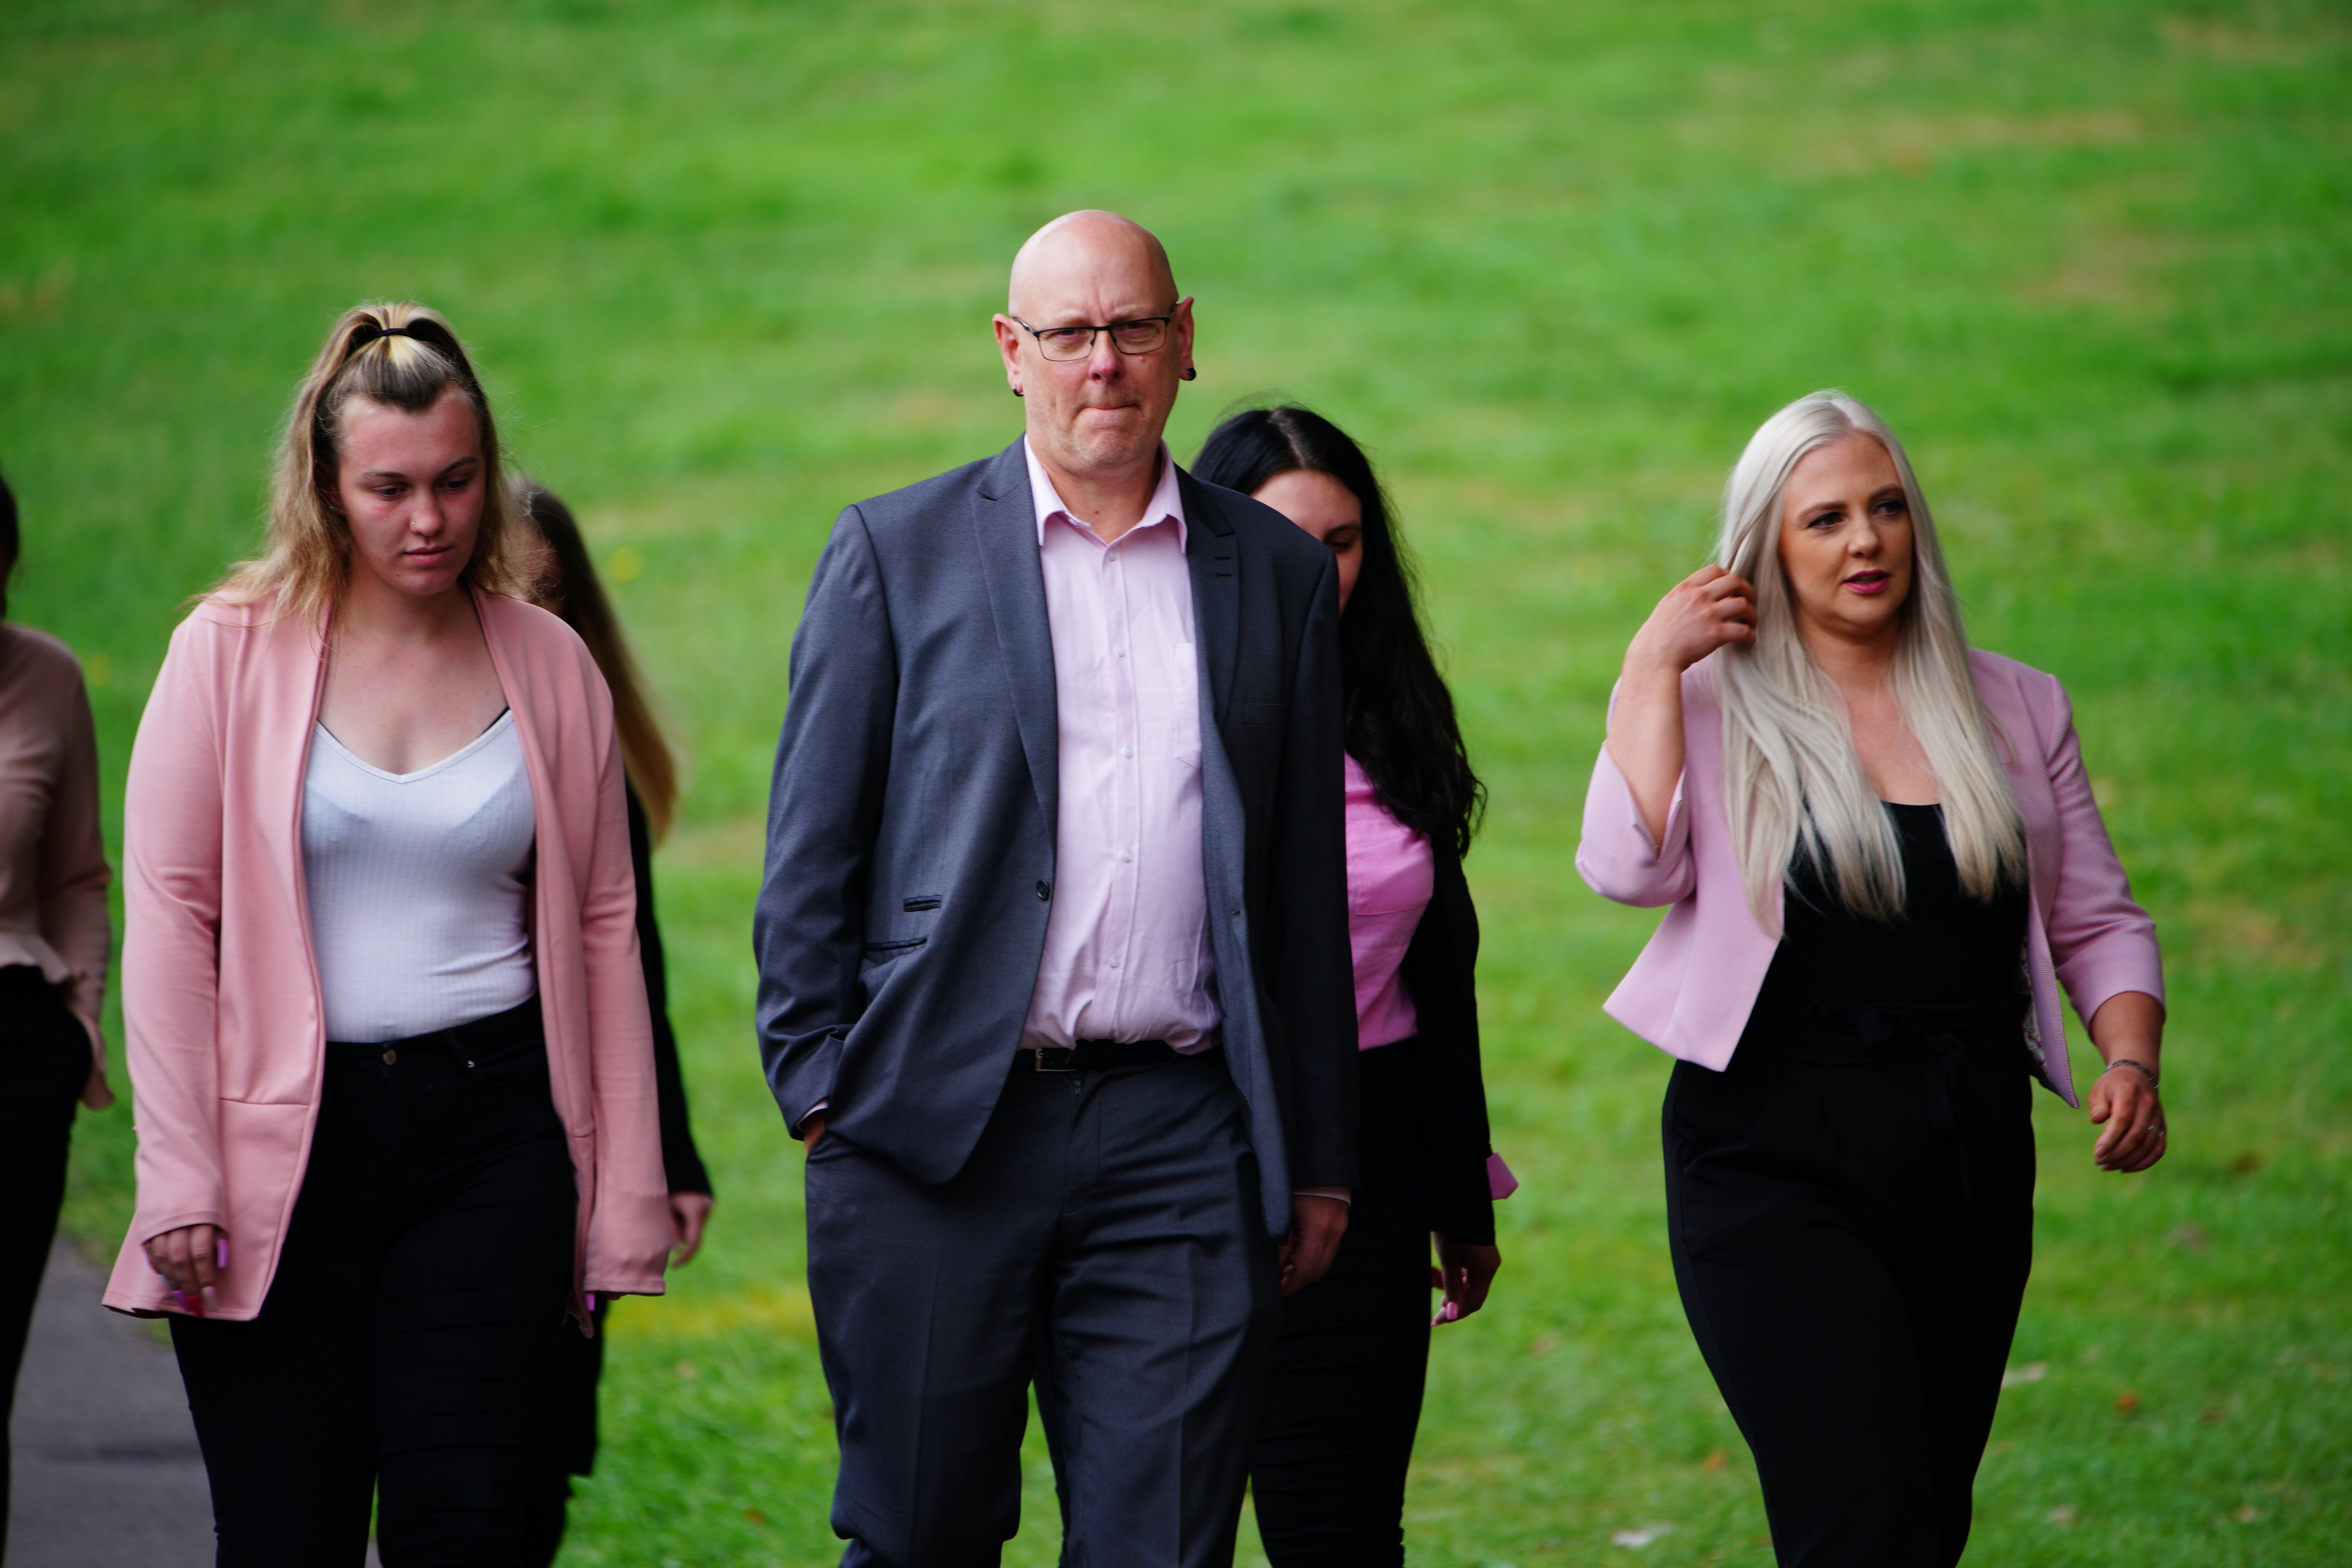 Celia Marsh’s husband Andy Marsh (centre), and her family arrive for her inquest at Avon and Somerset Coroner’s court in Bristol (Ben Birchall/PA)